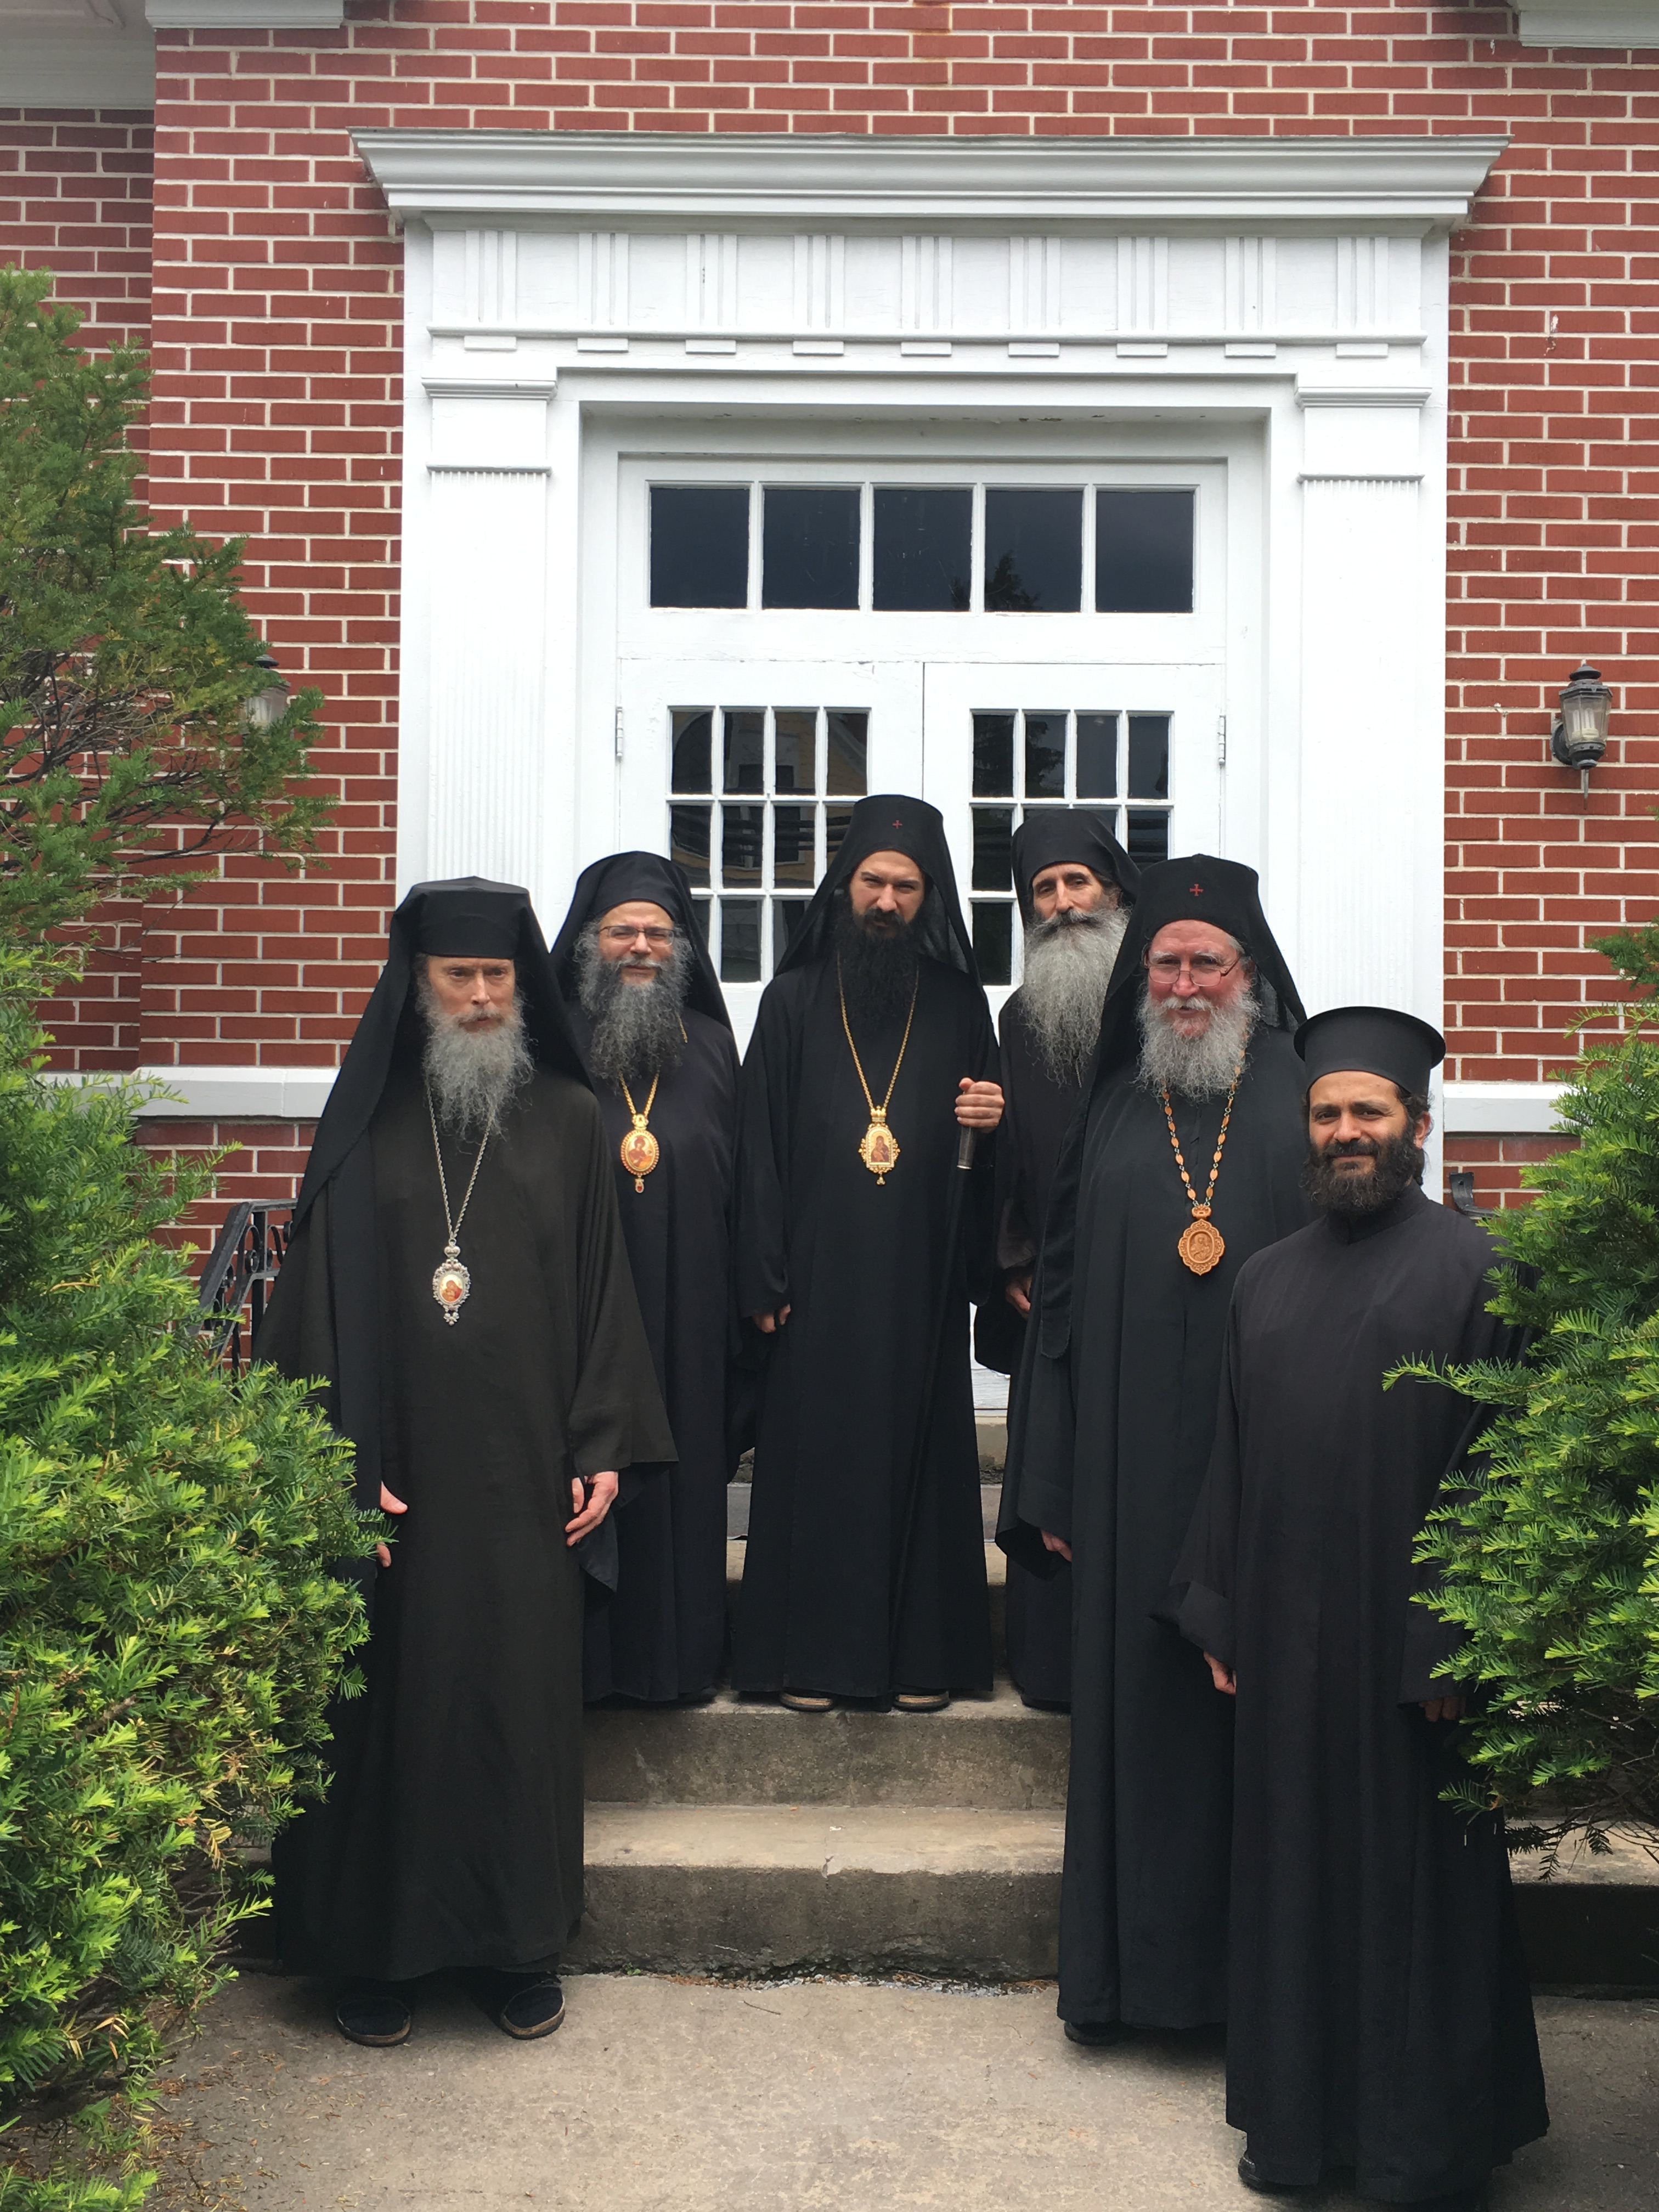 The Eparchial Synod of America